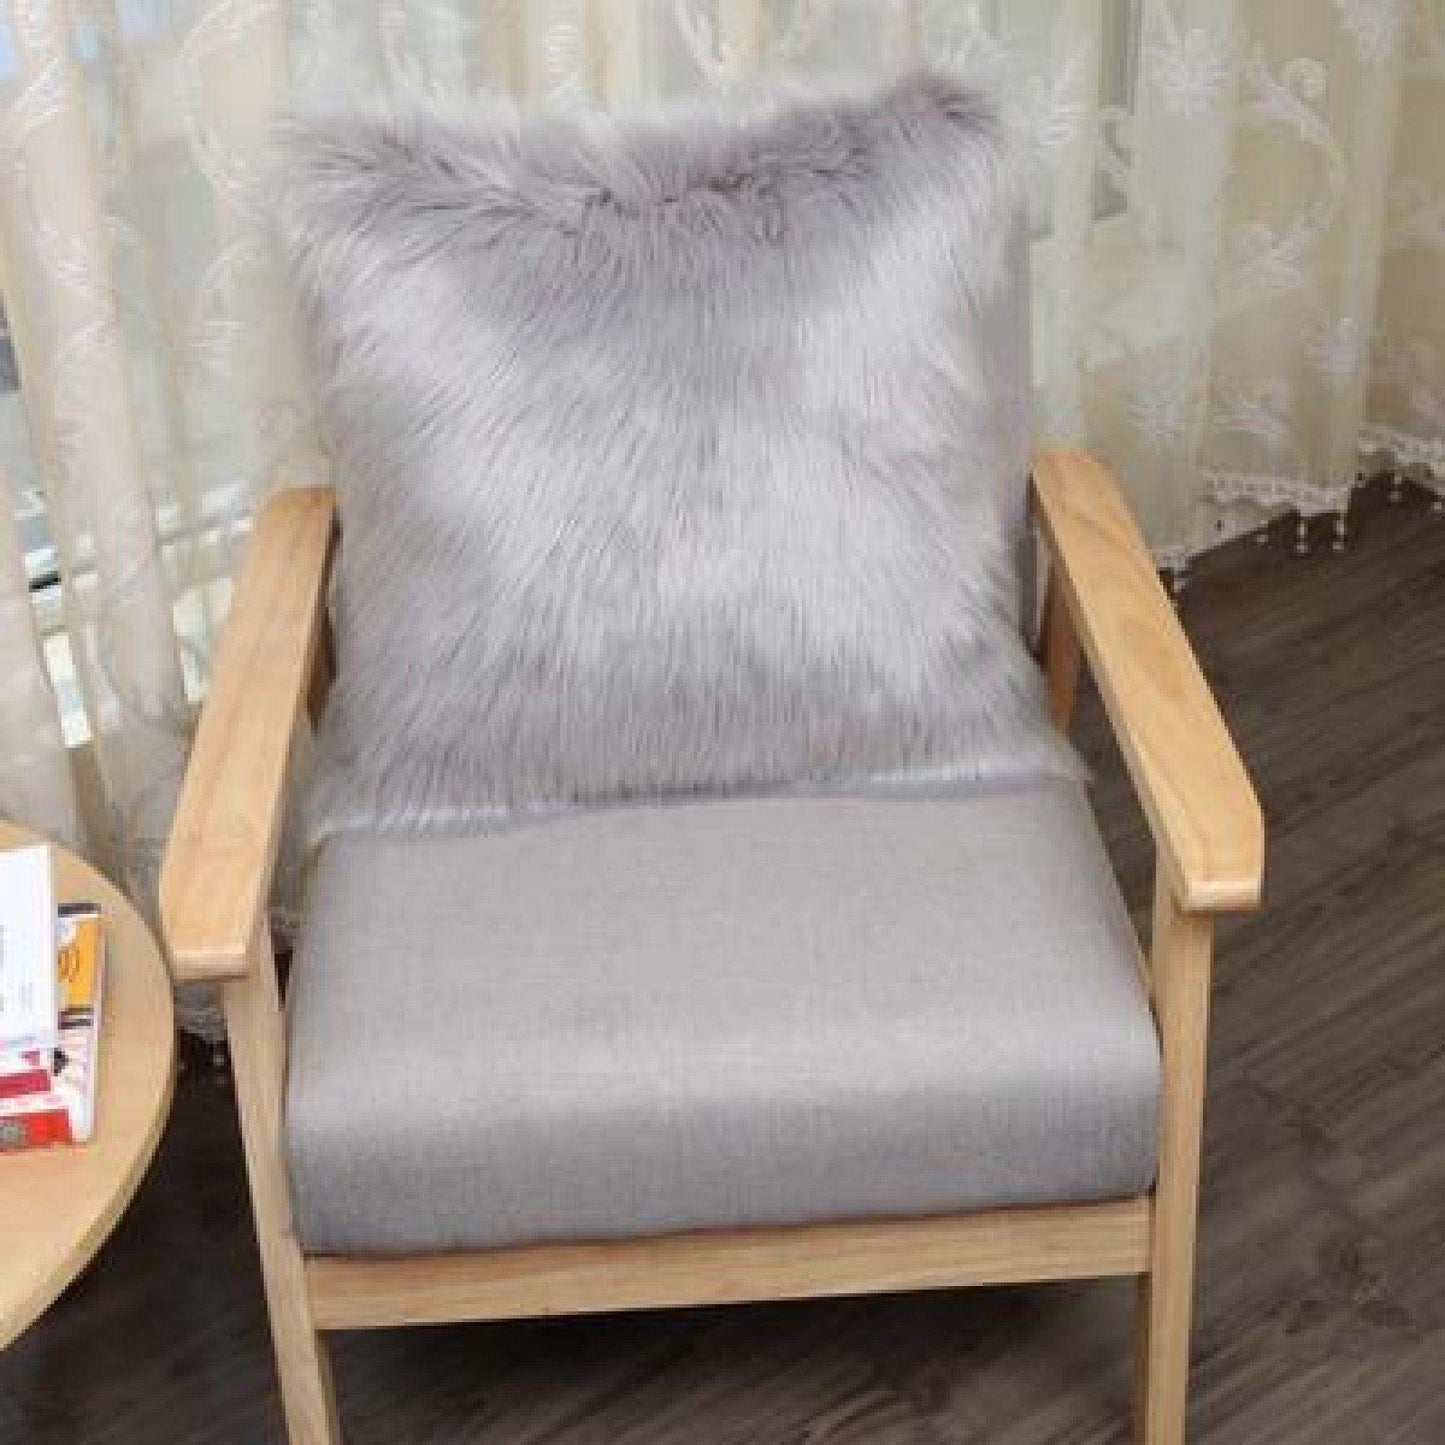 Lovely Removable Faux Fur Decorative Cushion Cover - Pretty Little Wish.com